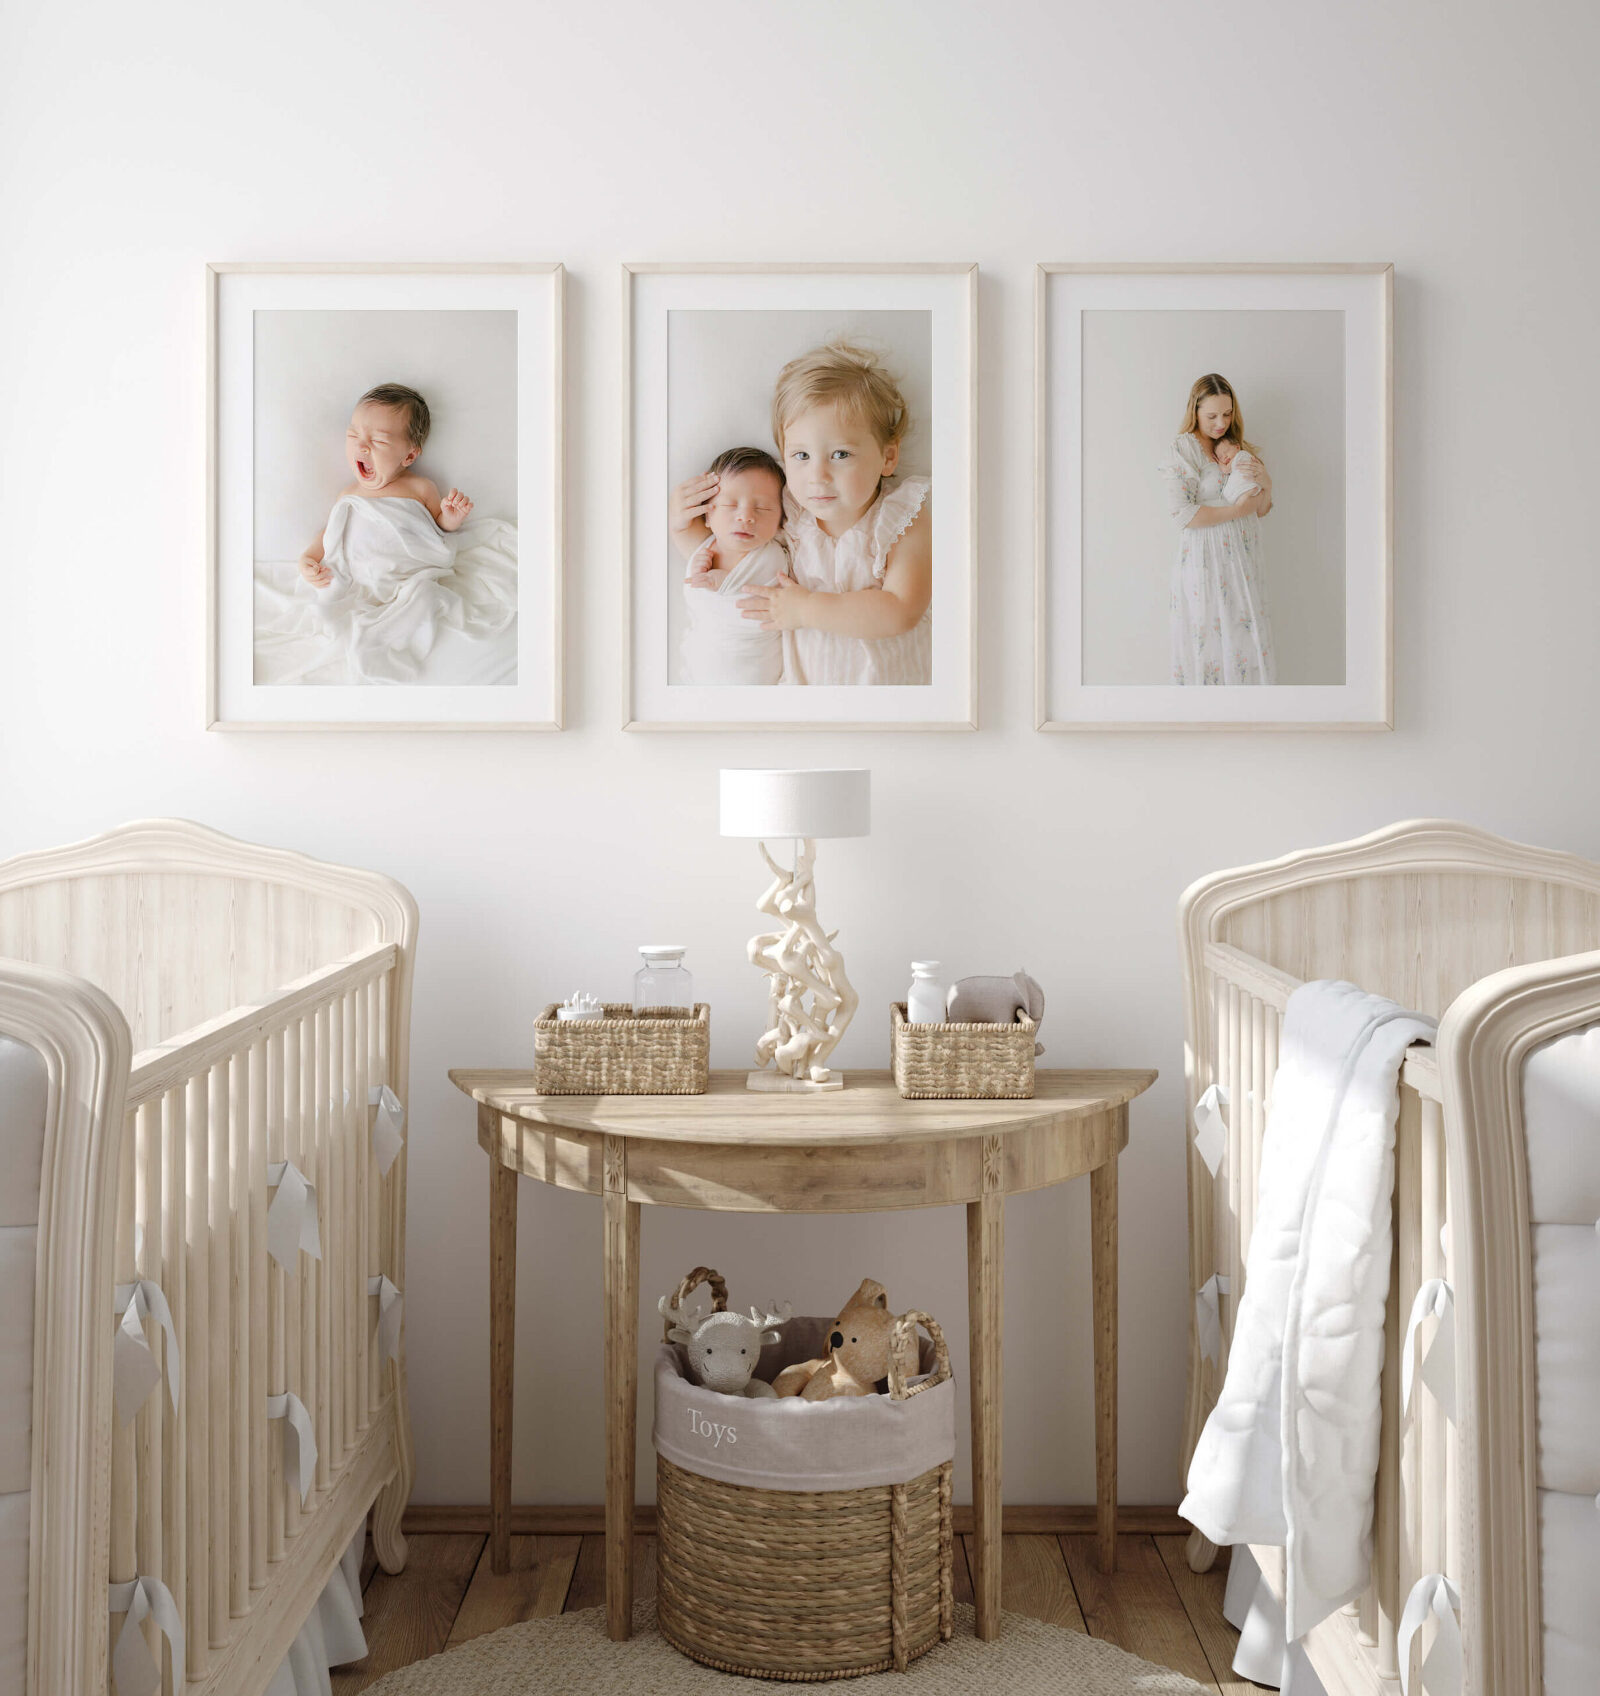 gorgeous light filled nursery featuring three adorable photographs with newborn and big sister